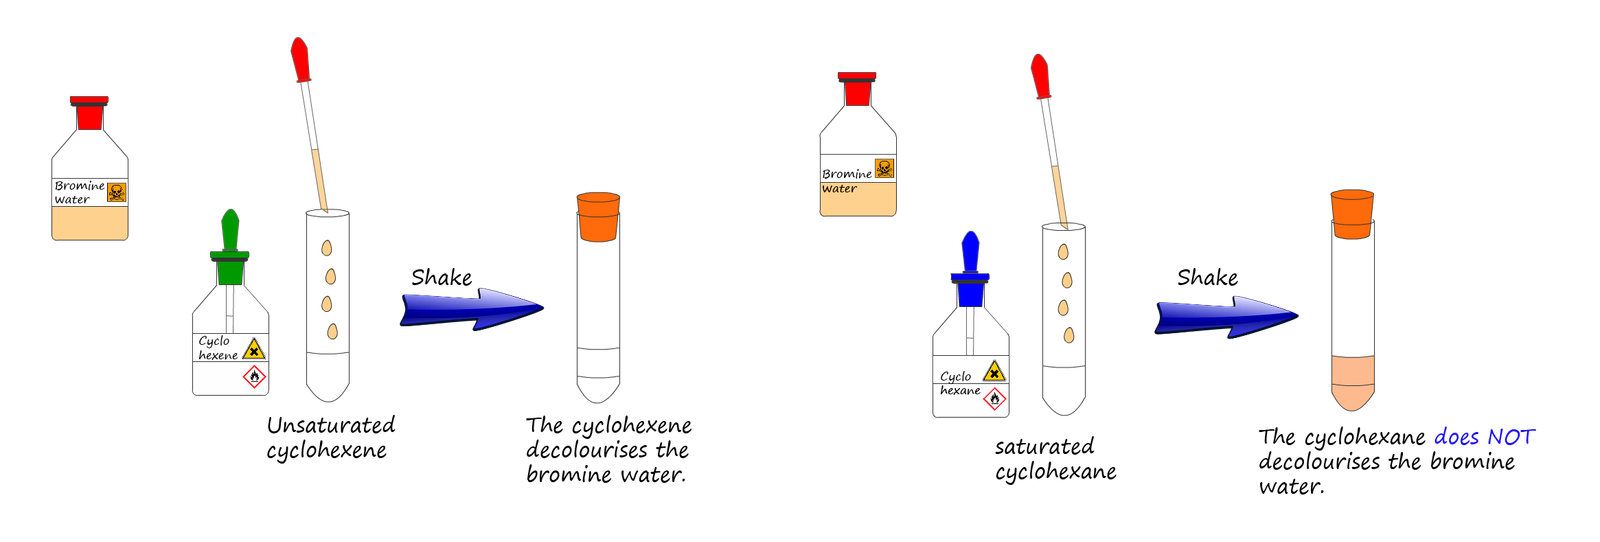 Results of  testing cyclohexane and cyclohexane with bromine water, diagram and explanation of the results.